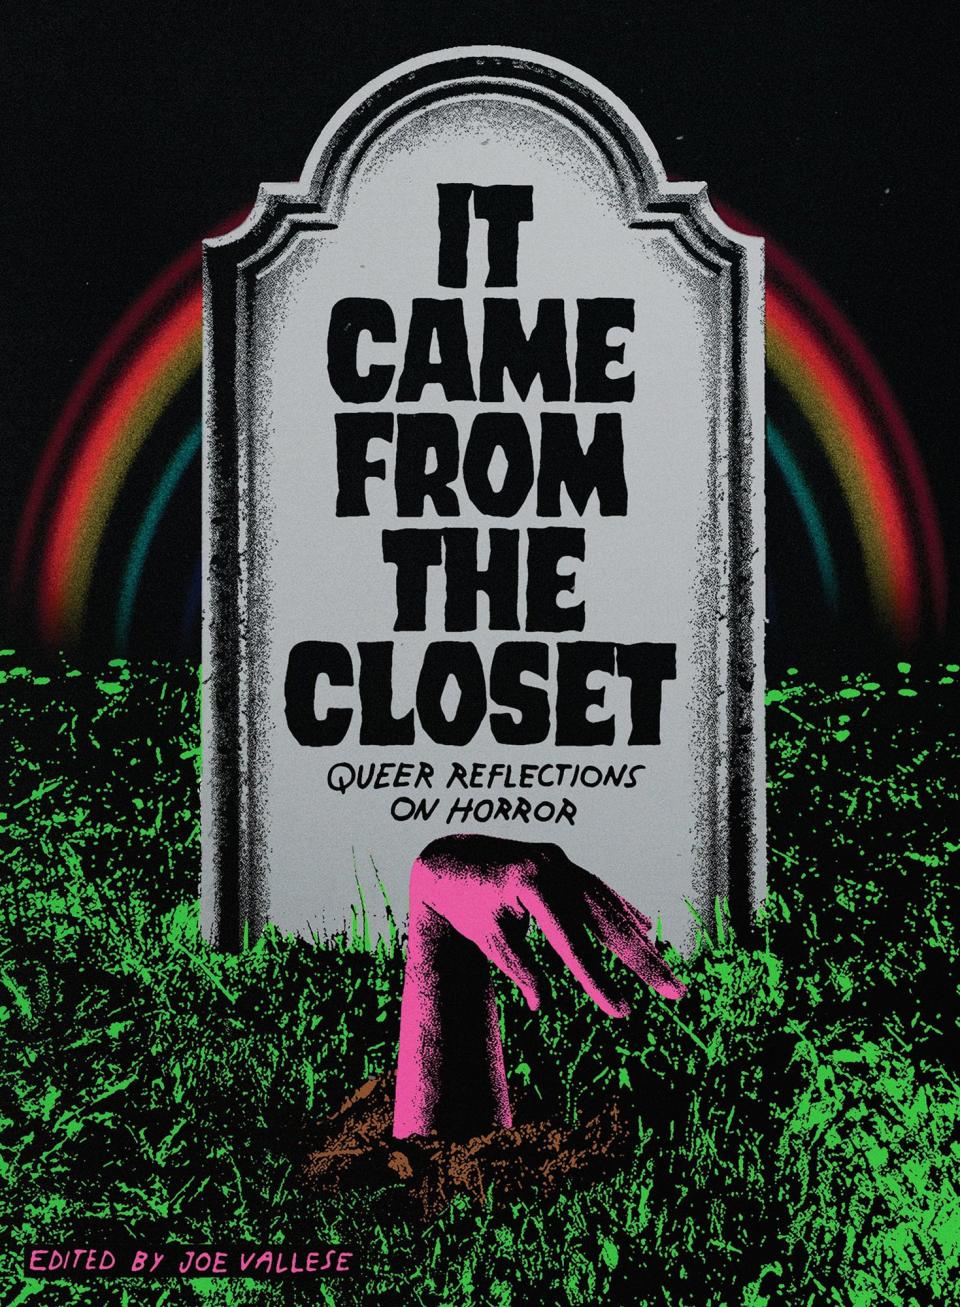 Cover art for editor Joe Vallese's "It Came From the Closet," a collection of queer reflections on horror movies.